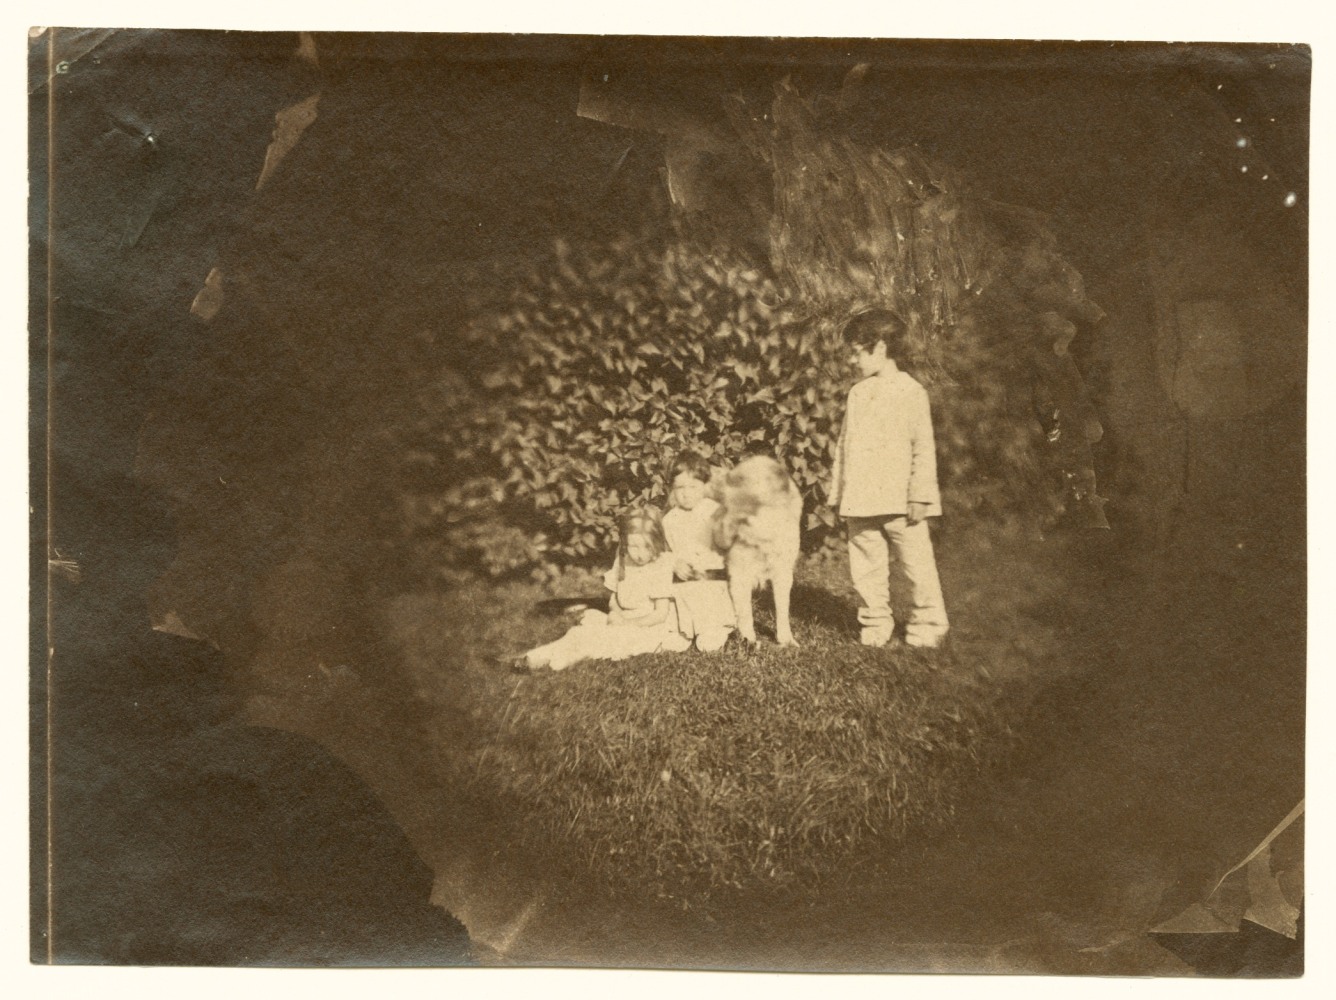 Charles NÈGRE (French, 1820-1880) The children of actress Rachel with a young girl and dog, Auteuil, probably autumn 1853 Albumen print from a collodion negative 9.7 cm tondo on 12.4 x 17.1 cm paper